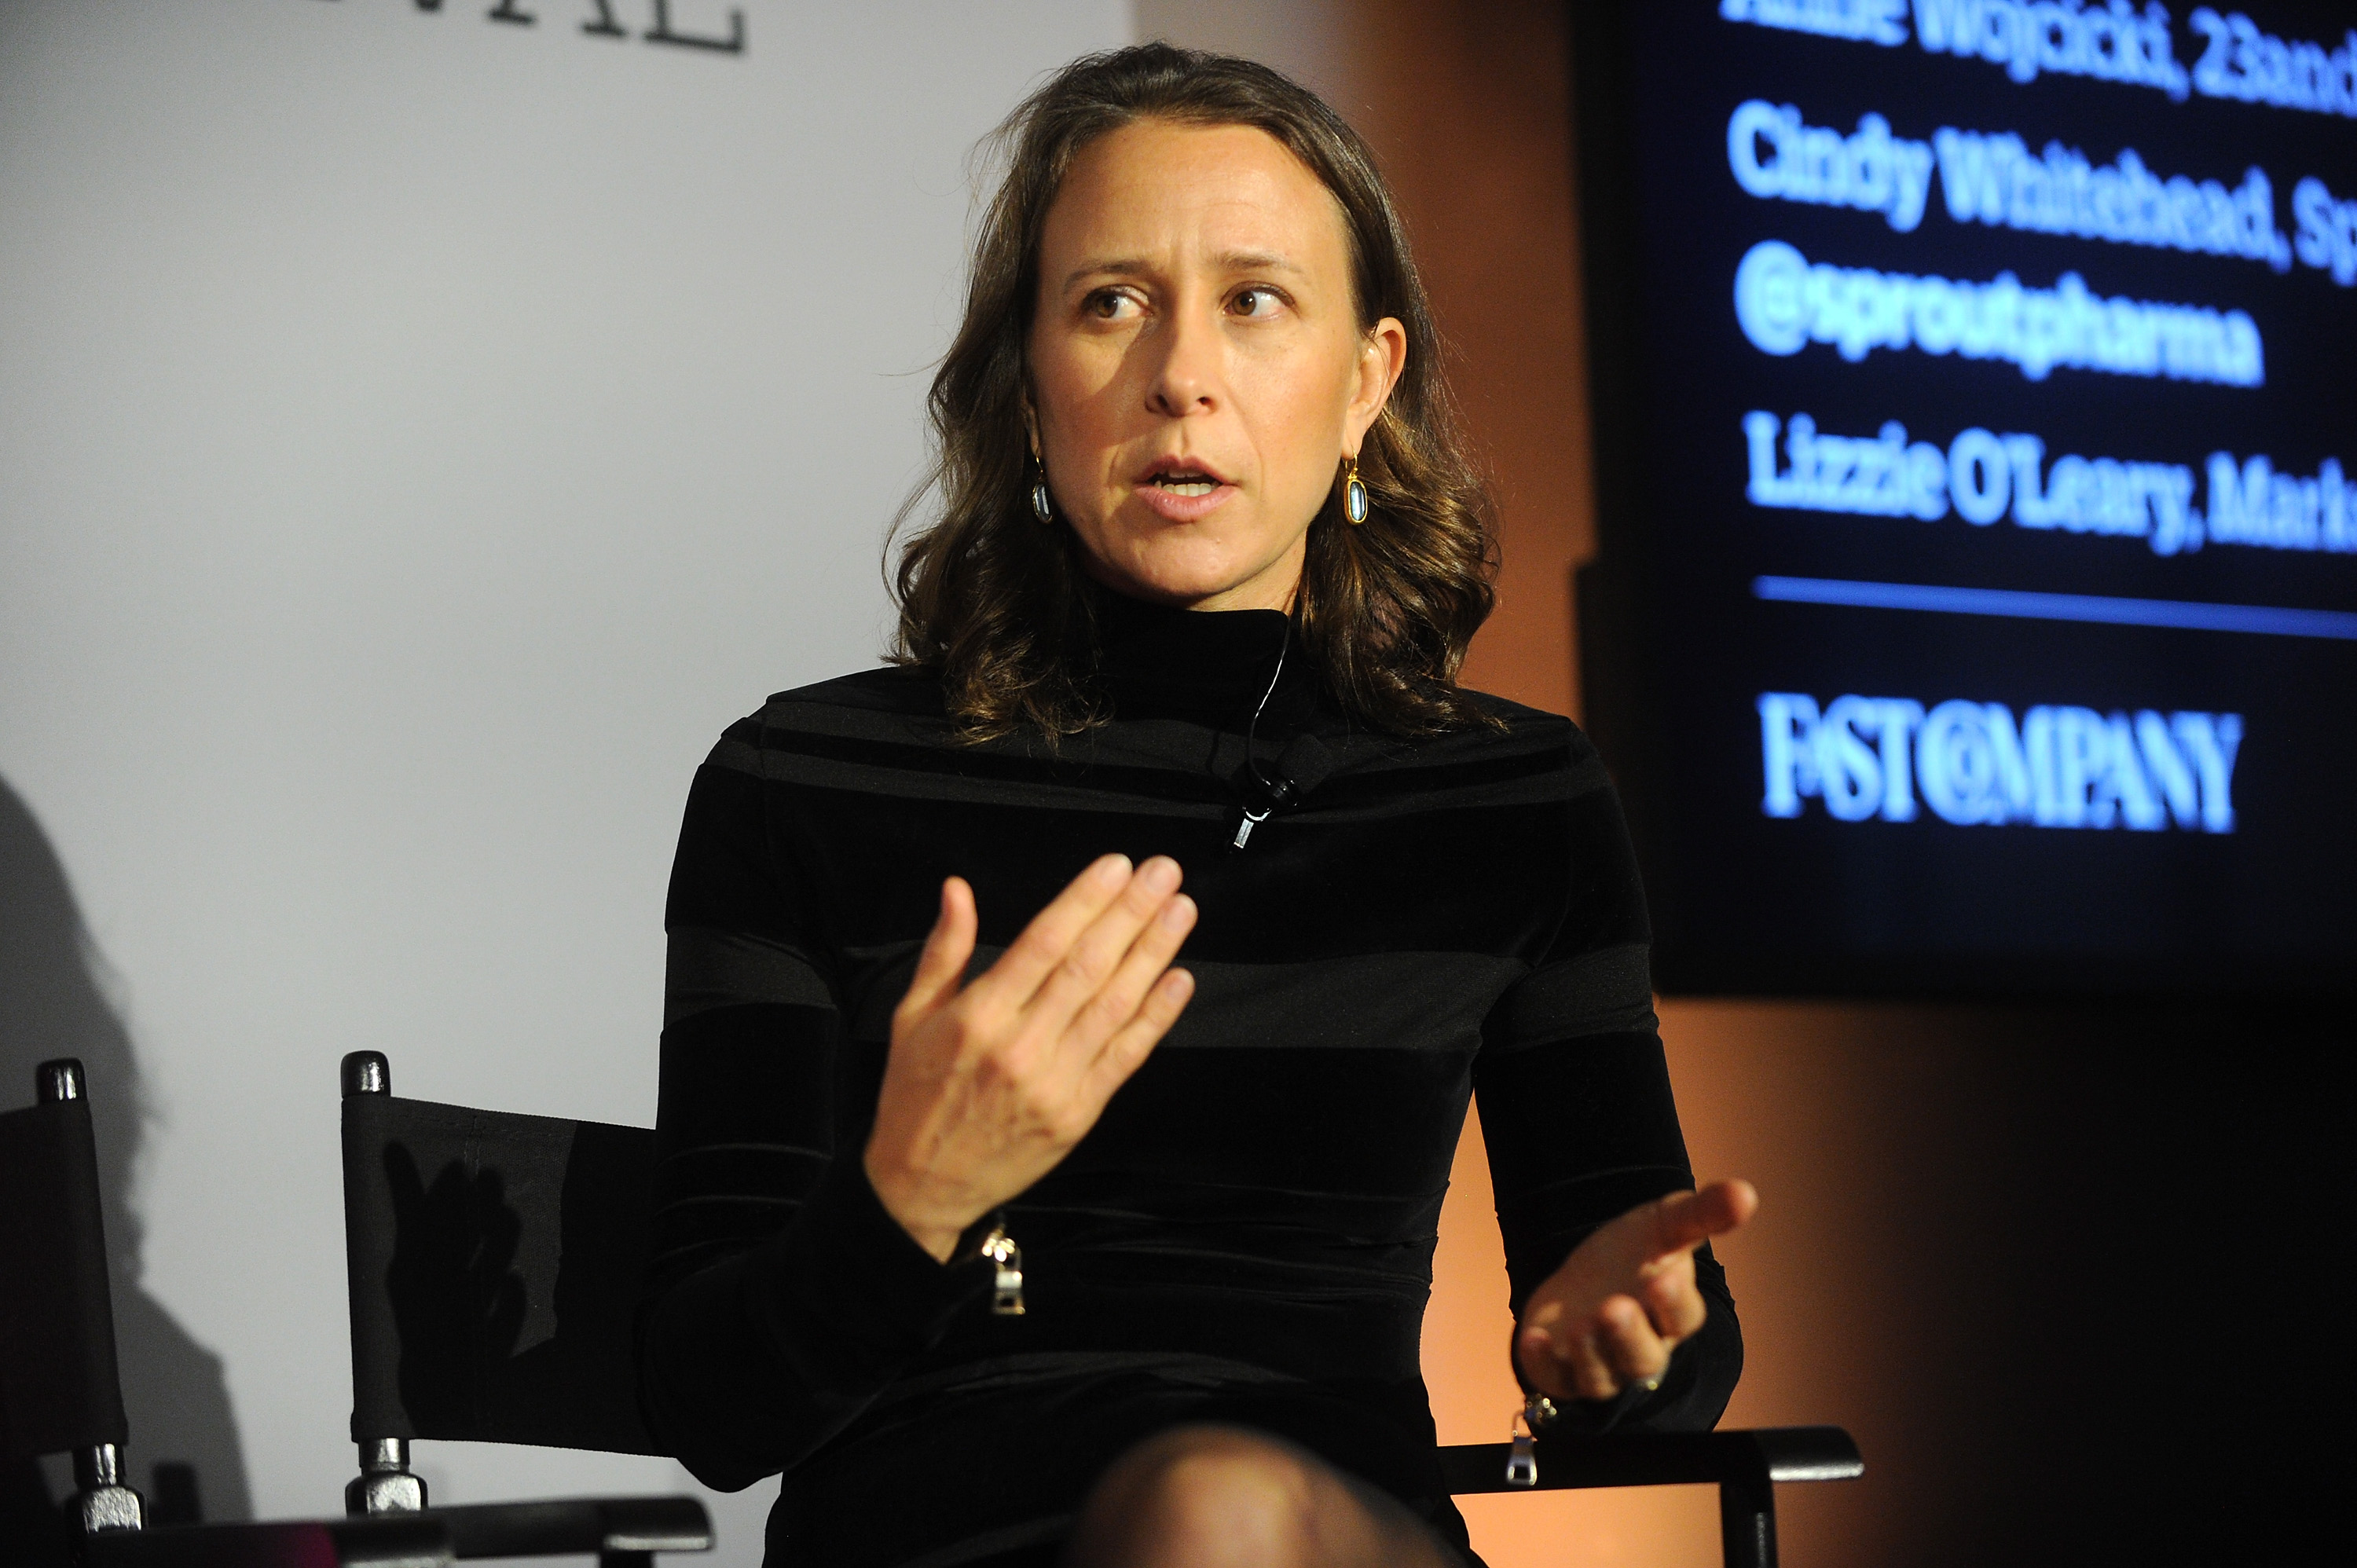 23andMe CEO Anne Wojcicki speaks on stage during 'The Fast Company Innovation Festival' - Data + Drugs: The New Evolution Of Drug Making With 23andMe And Sprout on Nov. 10, 2015 in New York City. (Brad Barket—Getty Images for Fast Company)